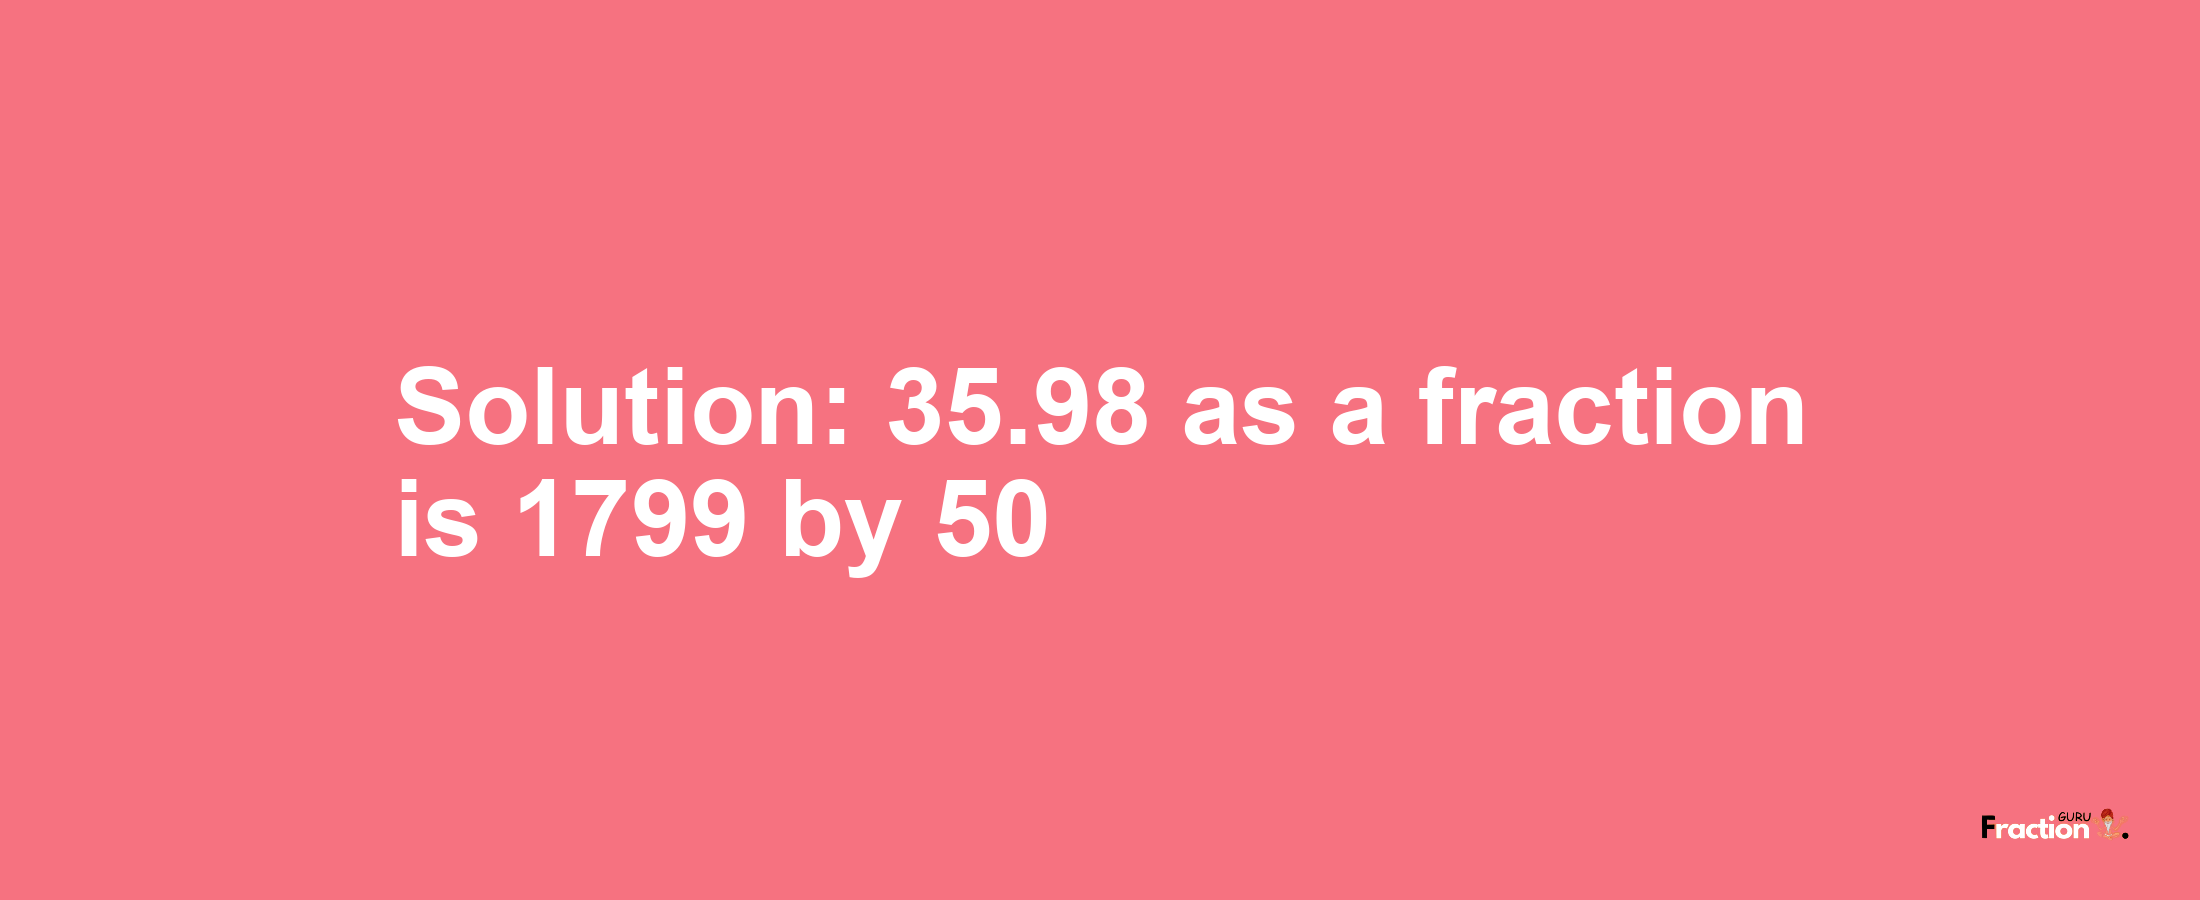 Solution:35.98 as a fraction is 1799/50